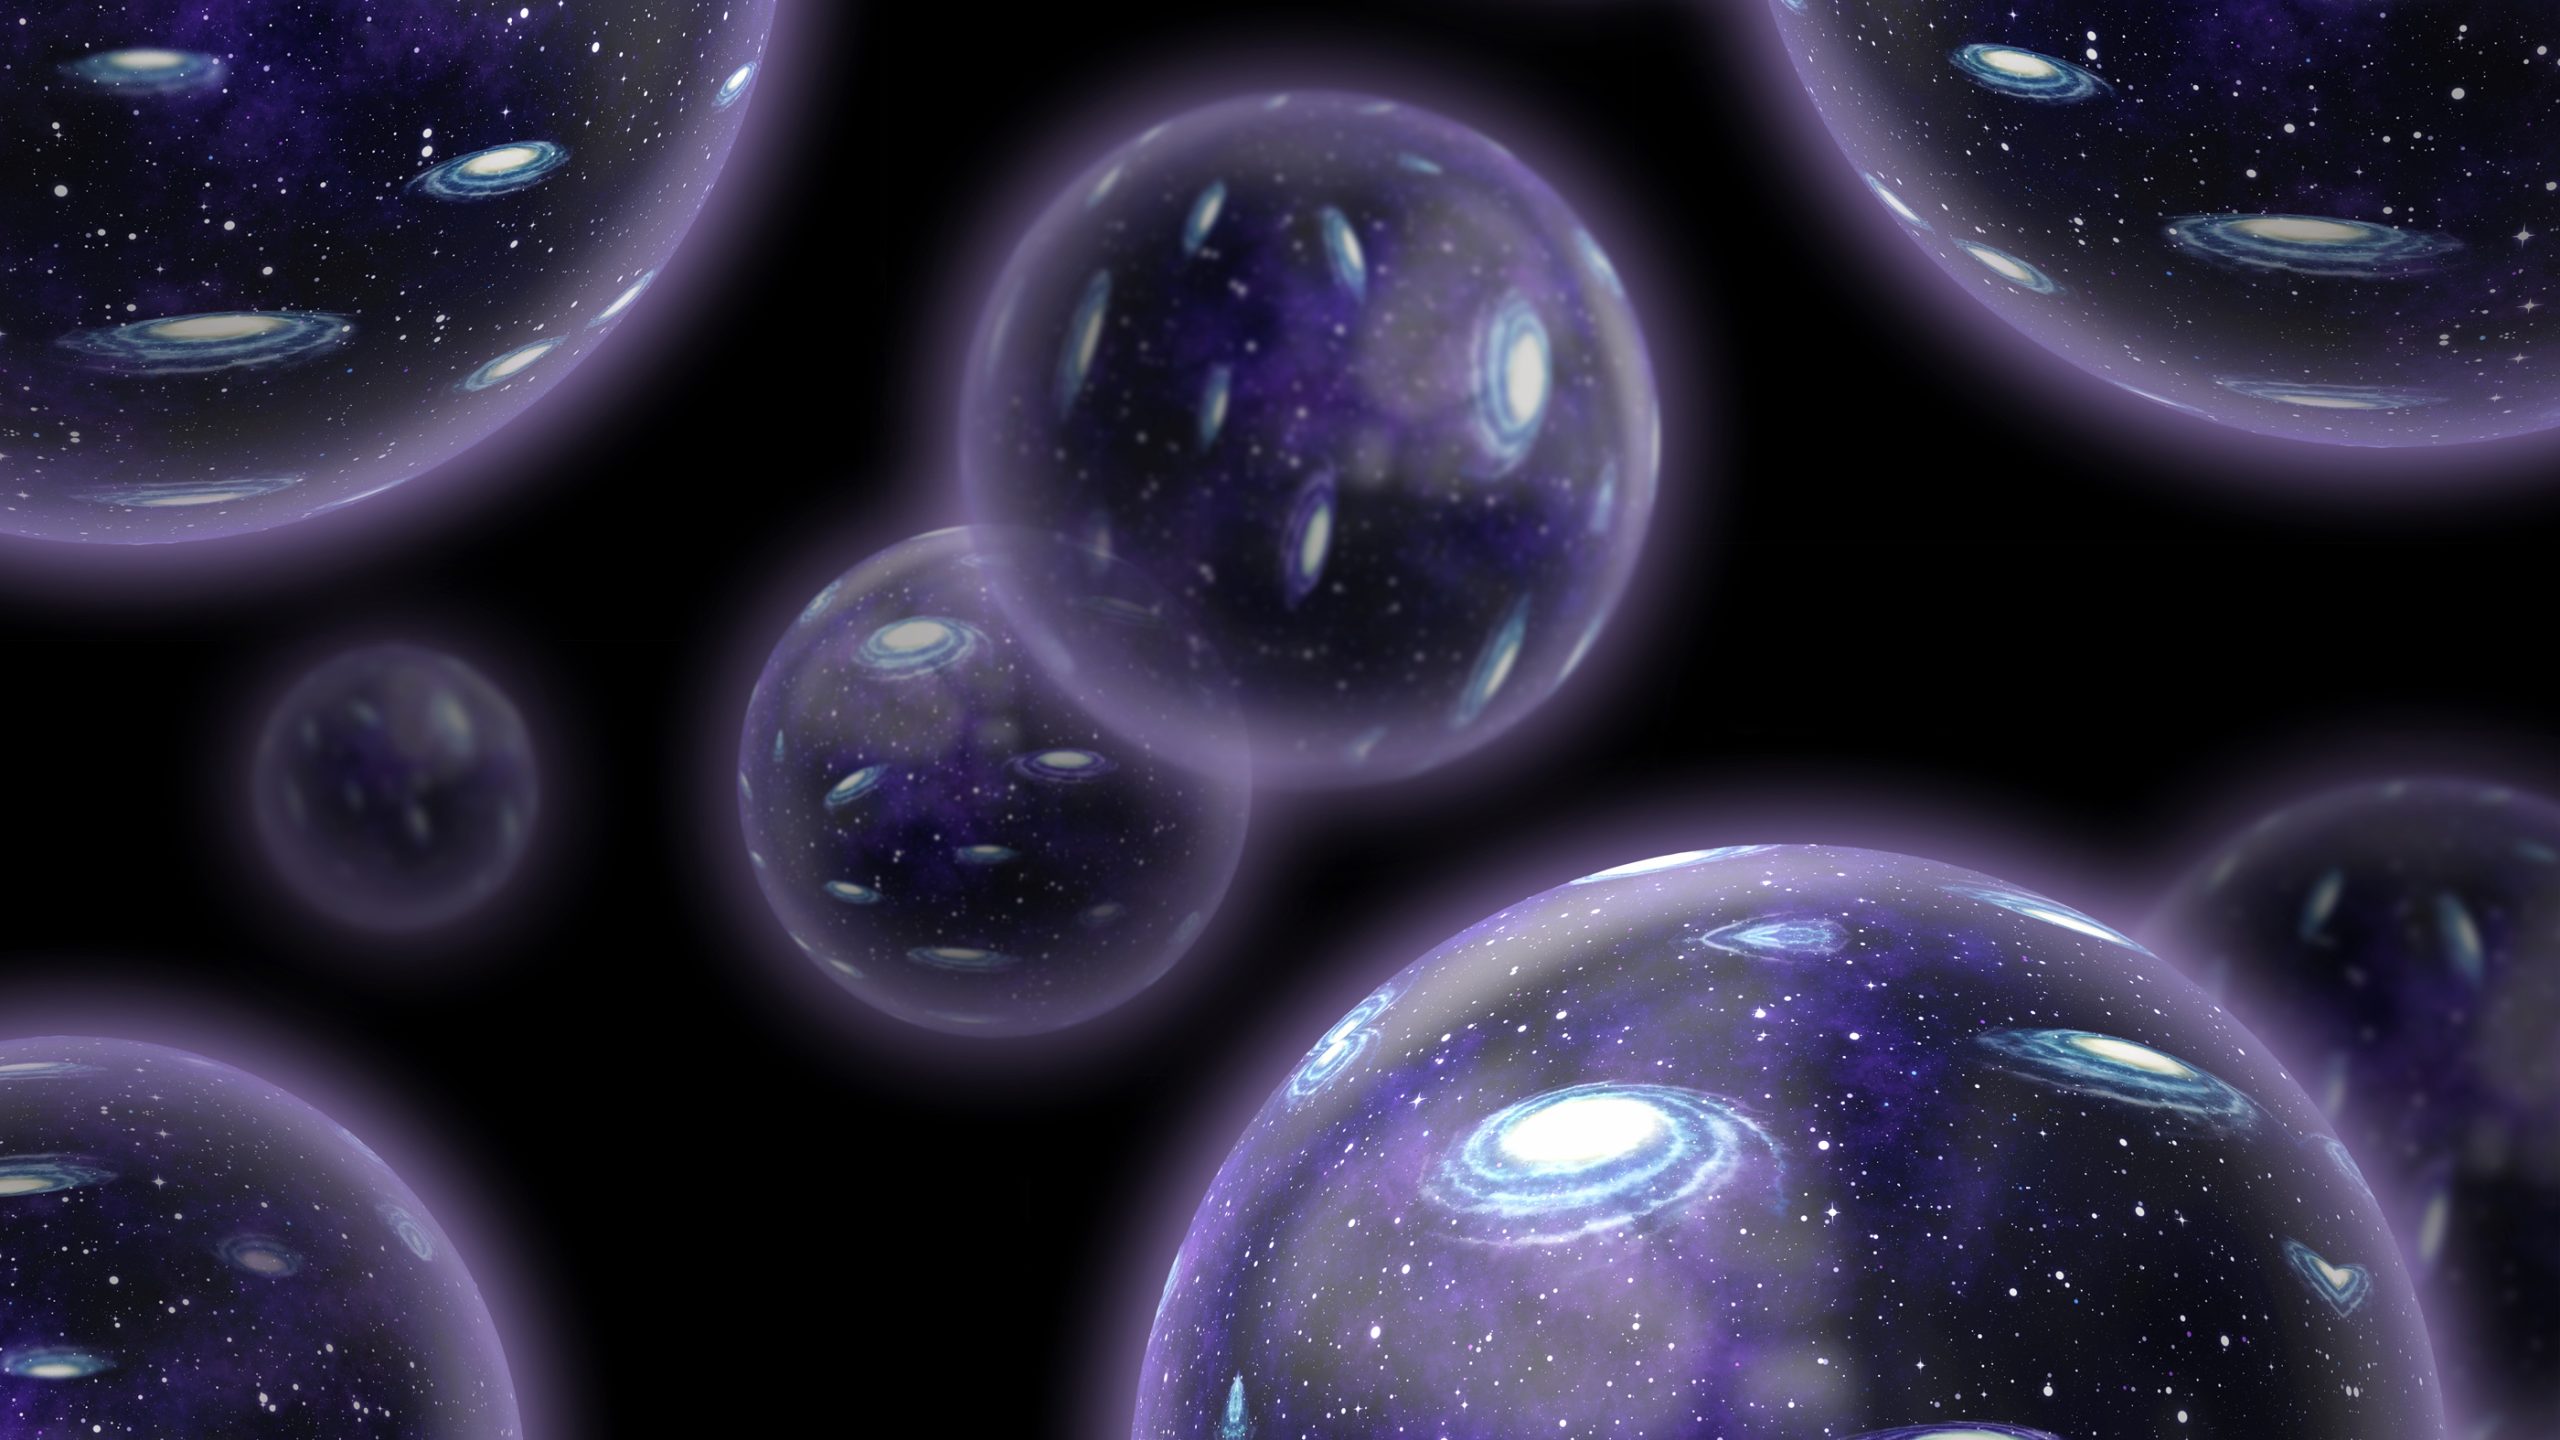 A recent study suggests that our universe may be akin to an expanding bubble within a concealed dimension.